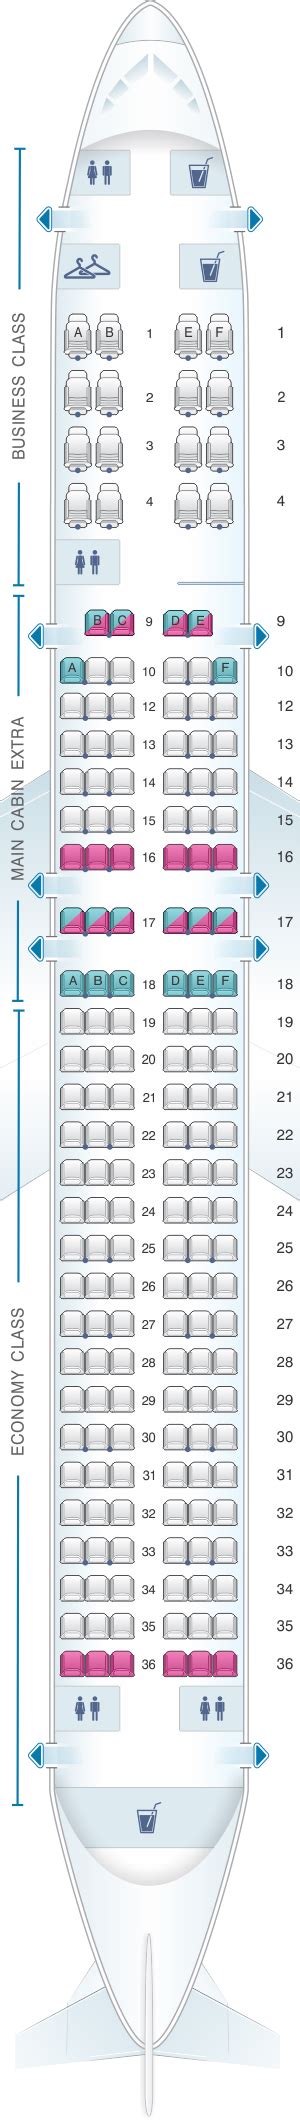 American Airlines Planes Seating Chart